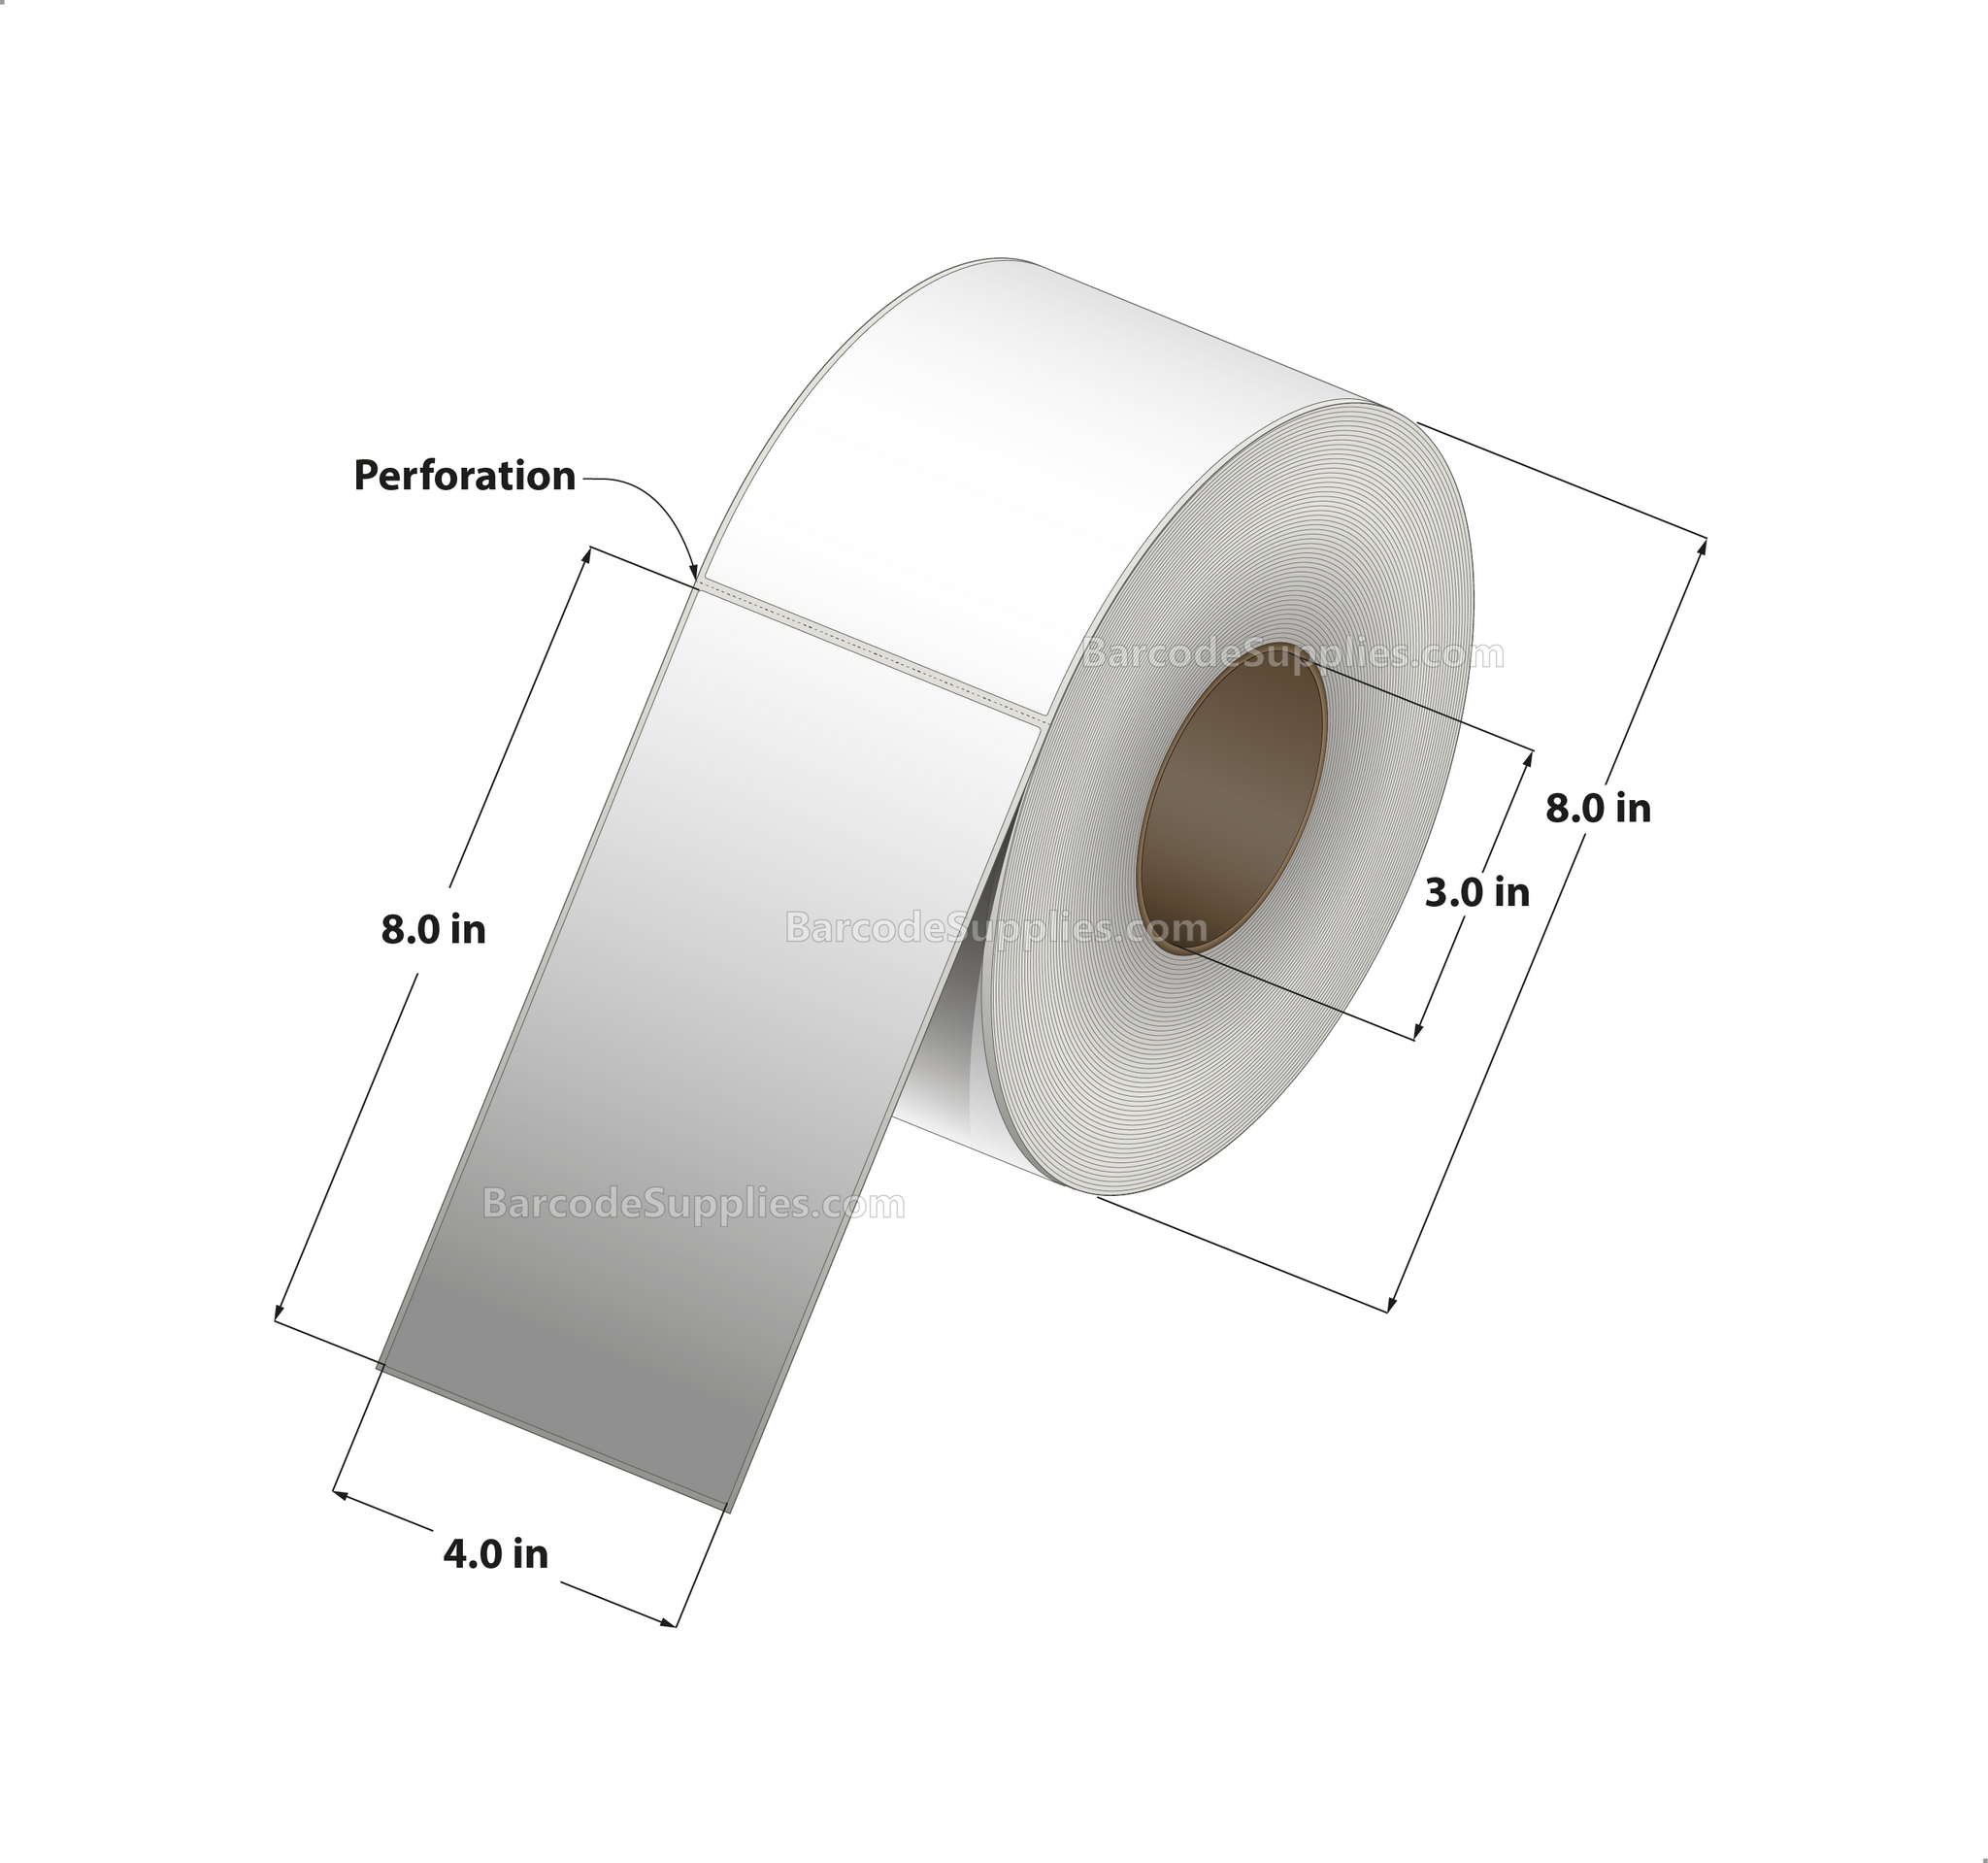 4 x 8 Thermal Transfer White Labels With Rubber Adhesive - Perforated - 800 Labels Per Roll - Carton Of 4 Rolls - 3200 Labels Total - MPN: CTT400800-3P